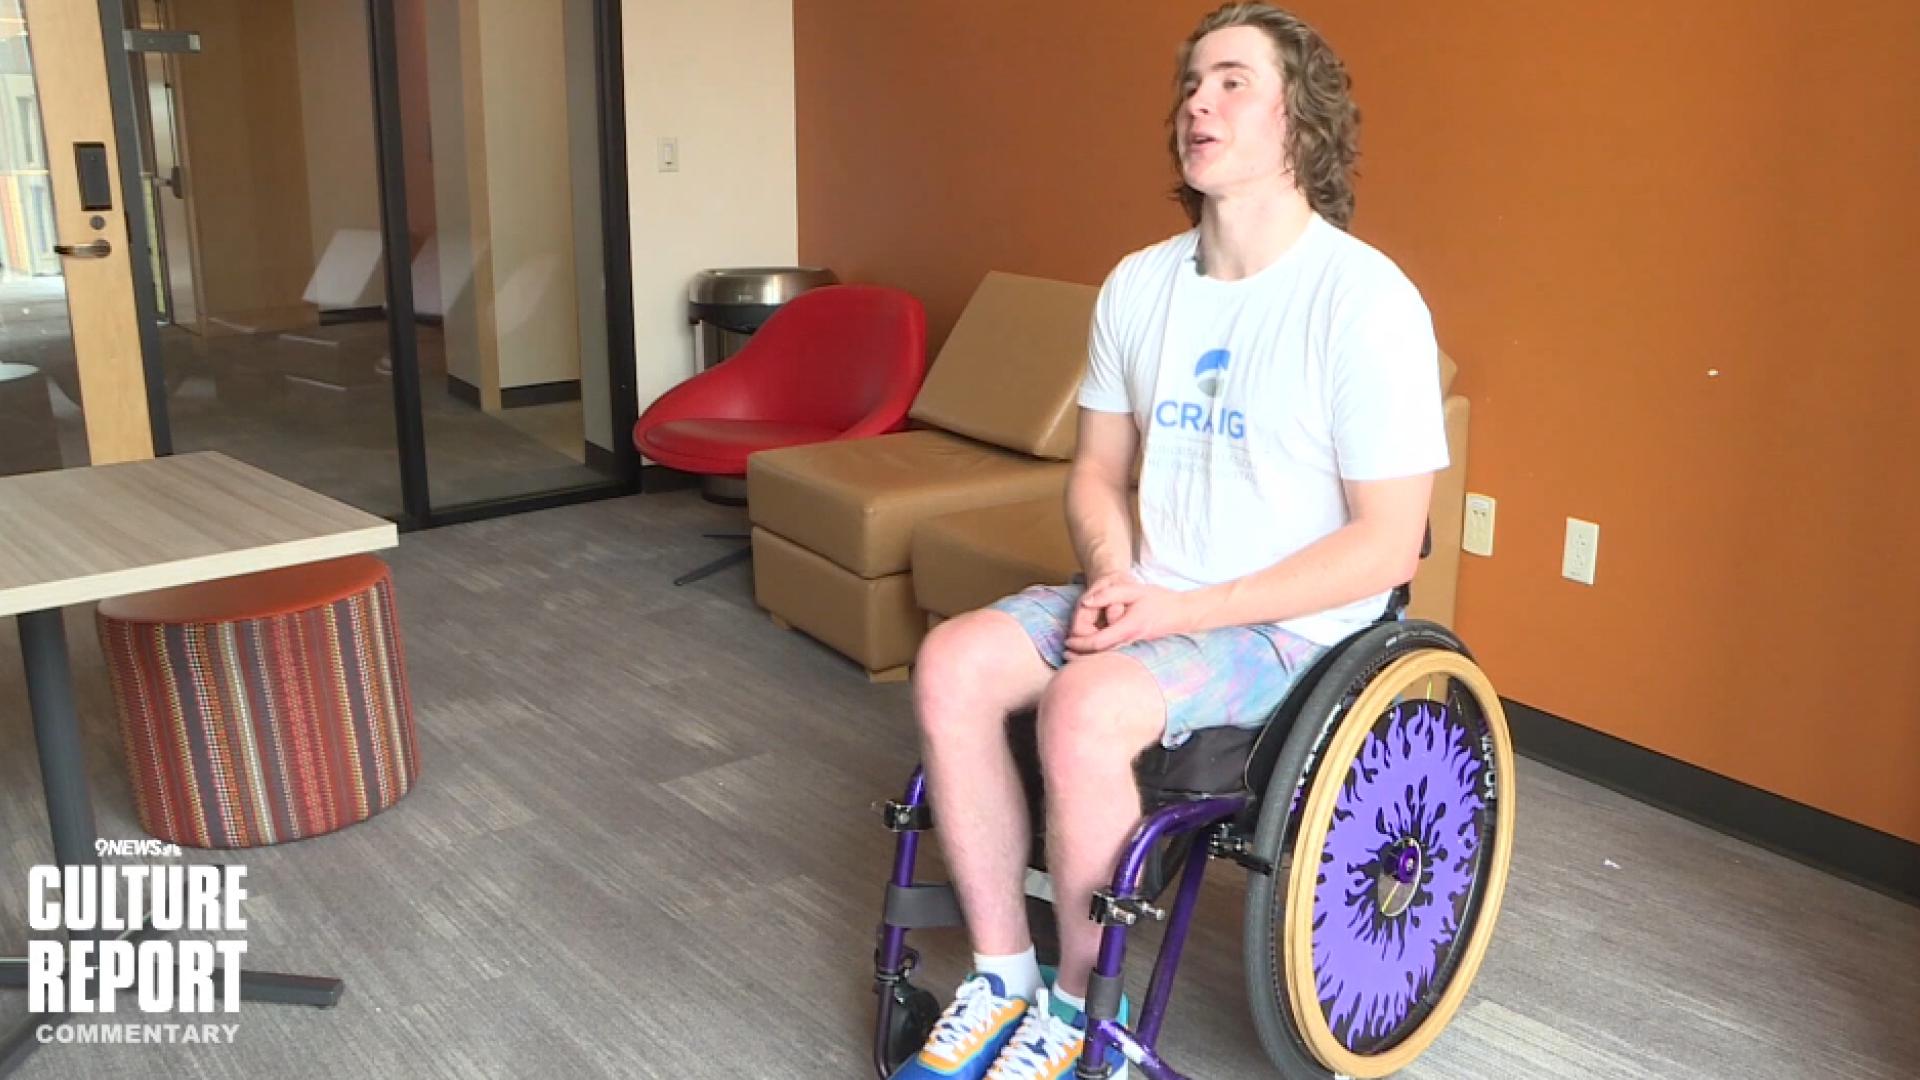 After being partially paralyzed more than three years ago, Mason Branstrator started posting videos about his experience learning how to adapt to life.